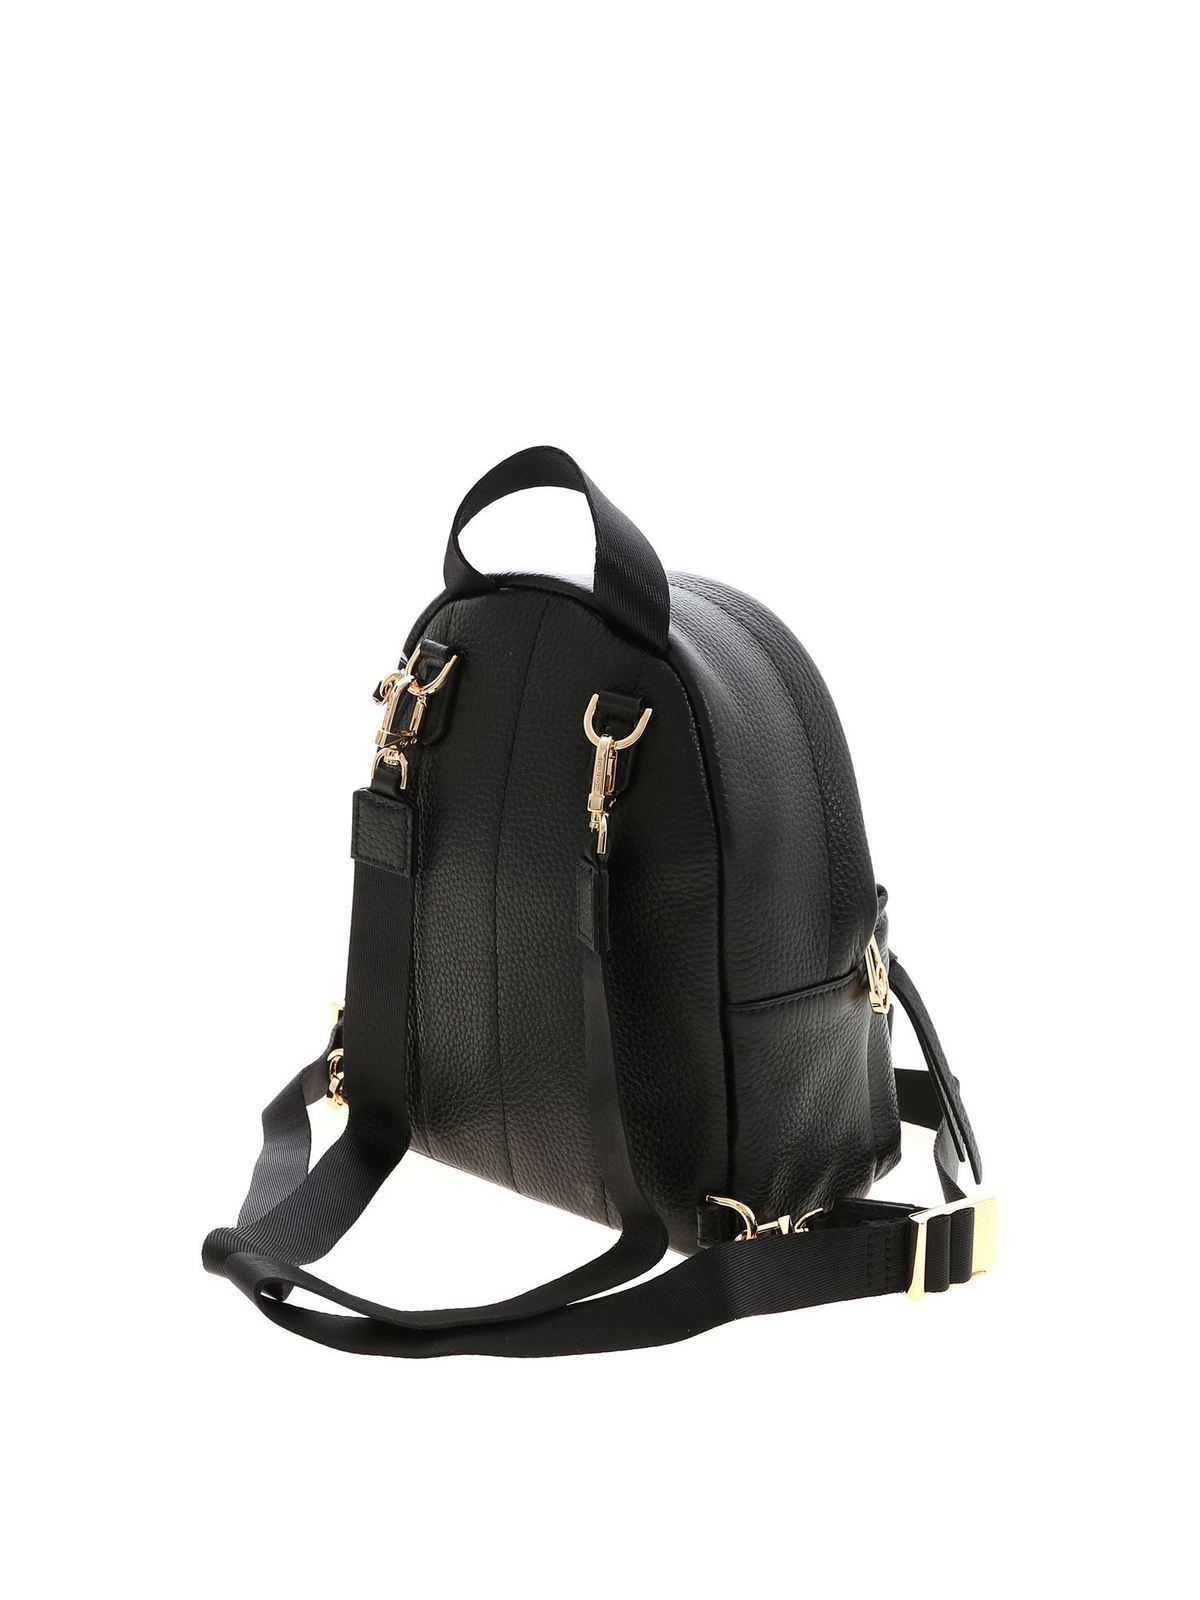 michael kors black backpack with gold studs